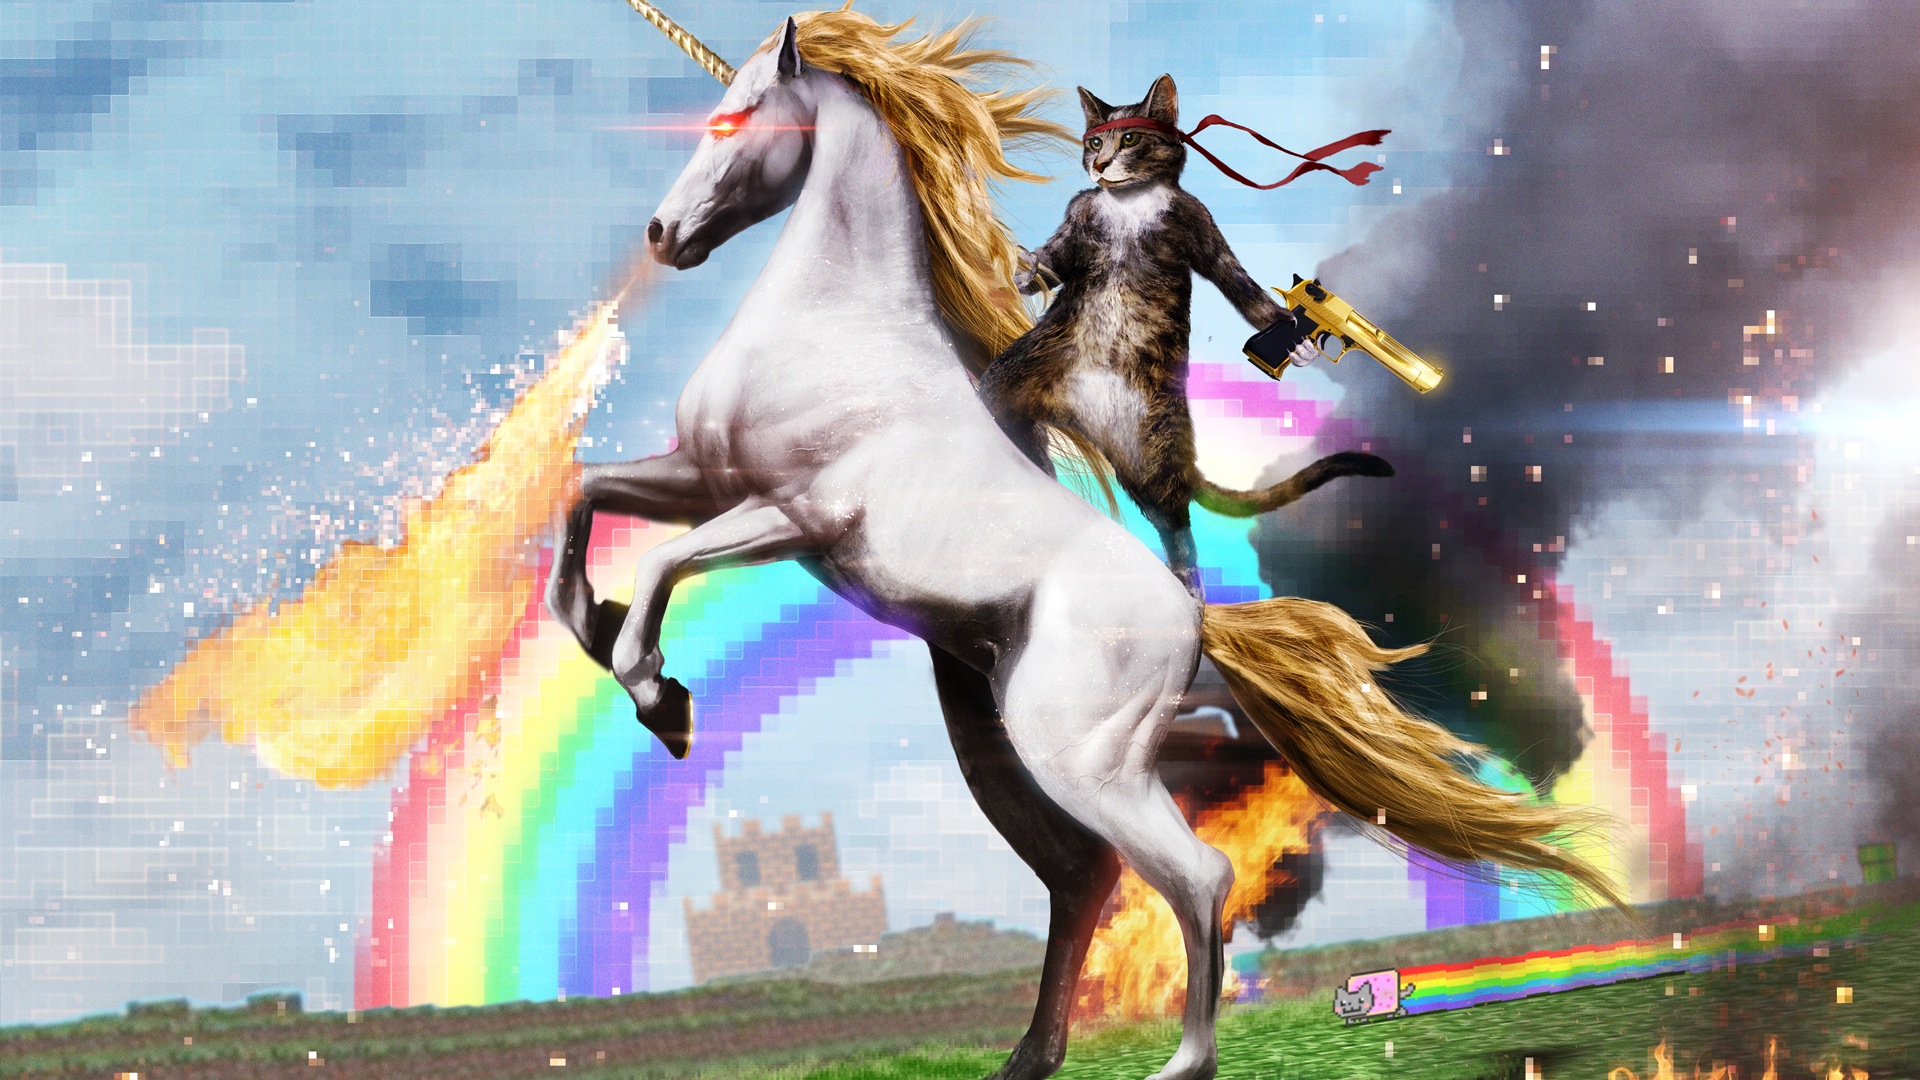 Cat Holding A Gun Whilst Riding A Unicorn That Is Shooting Flames From Its Mouth